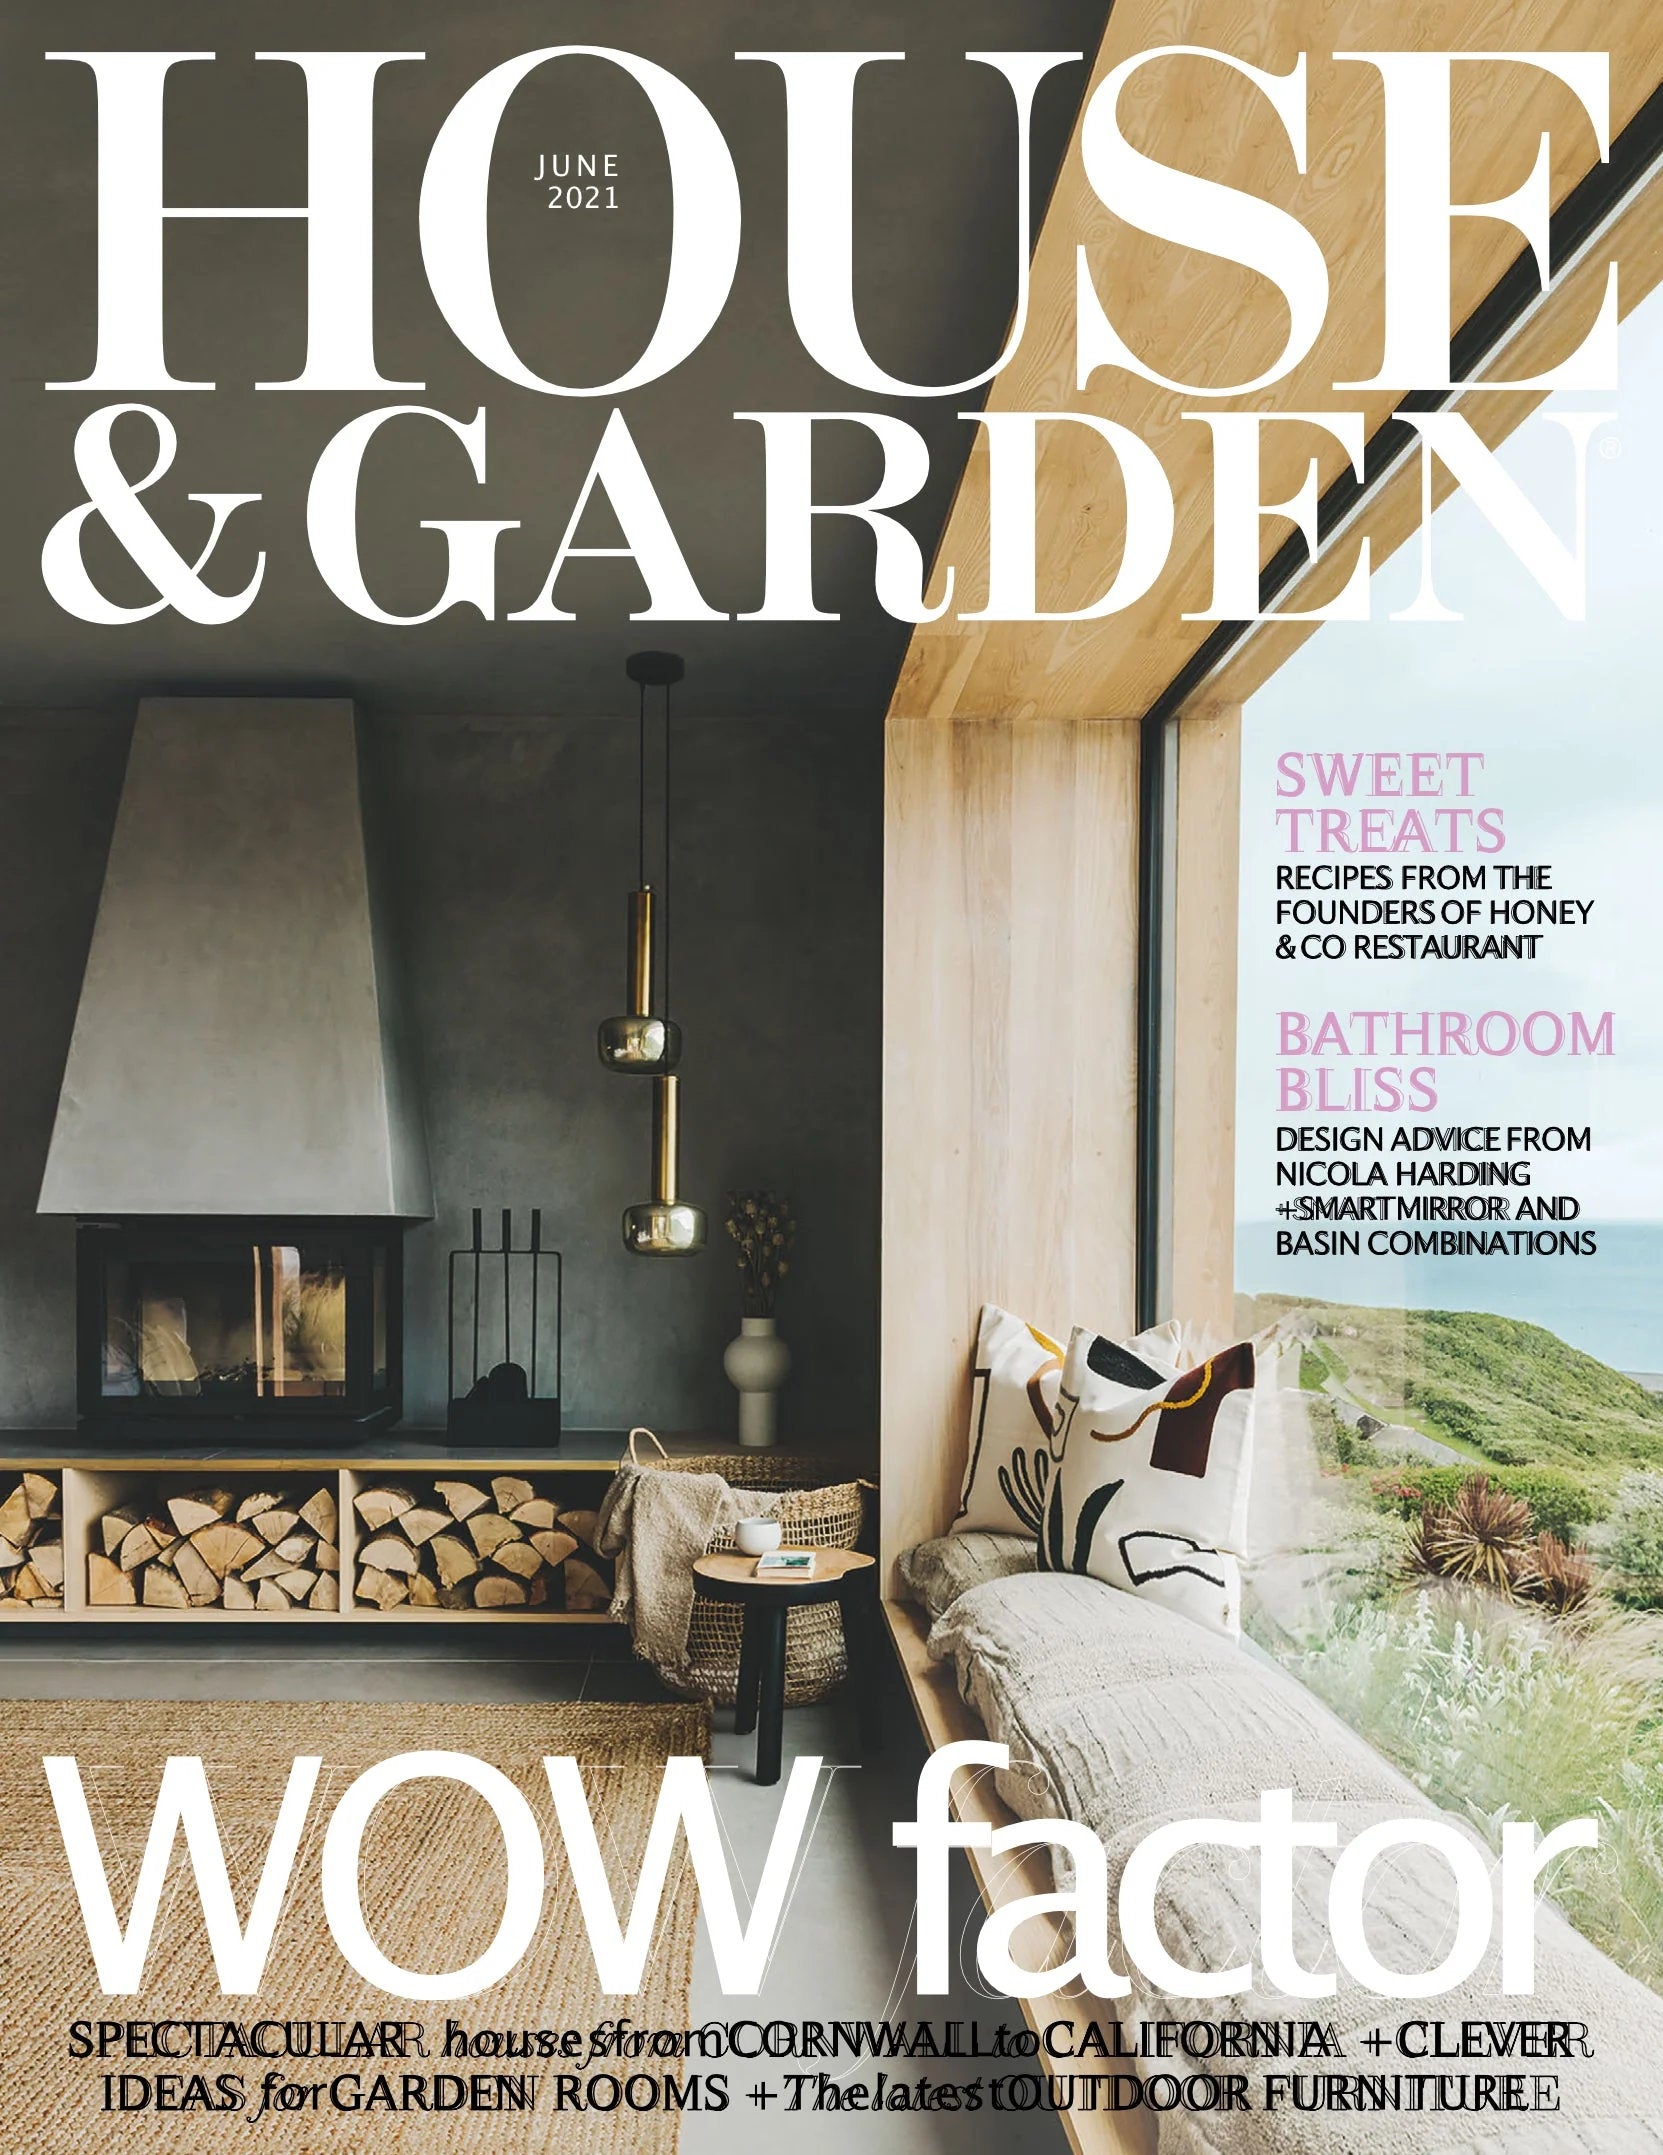 Living In Luxury article in House & Garden Citrus Tree Soaps